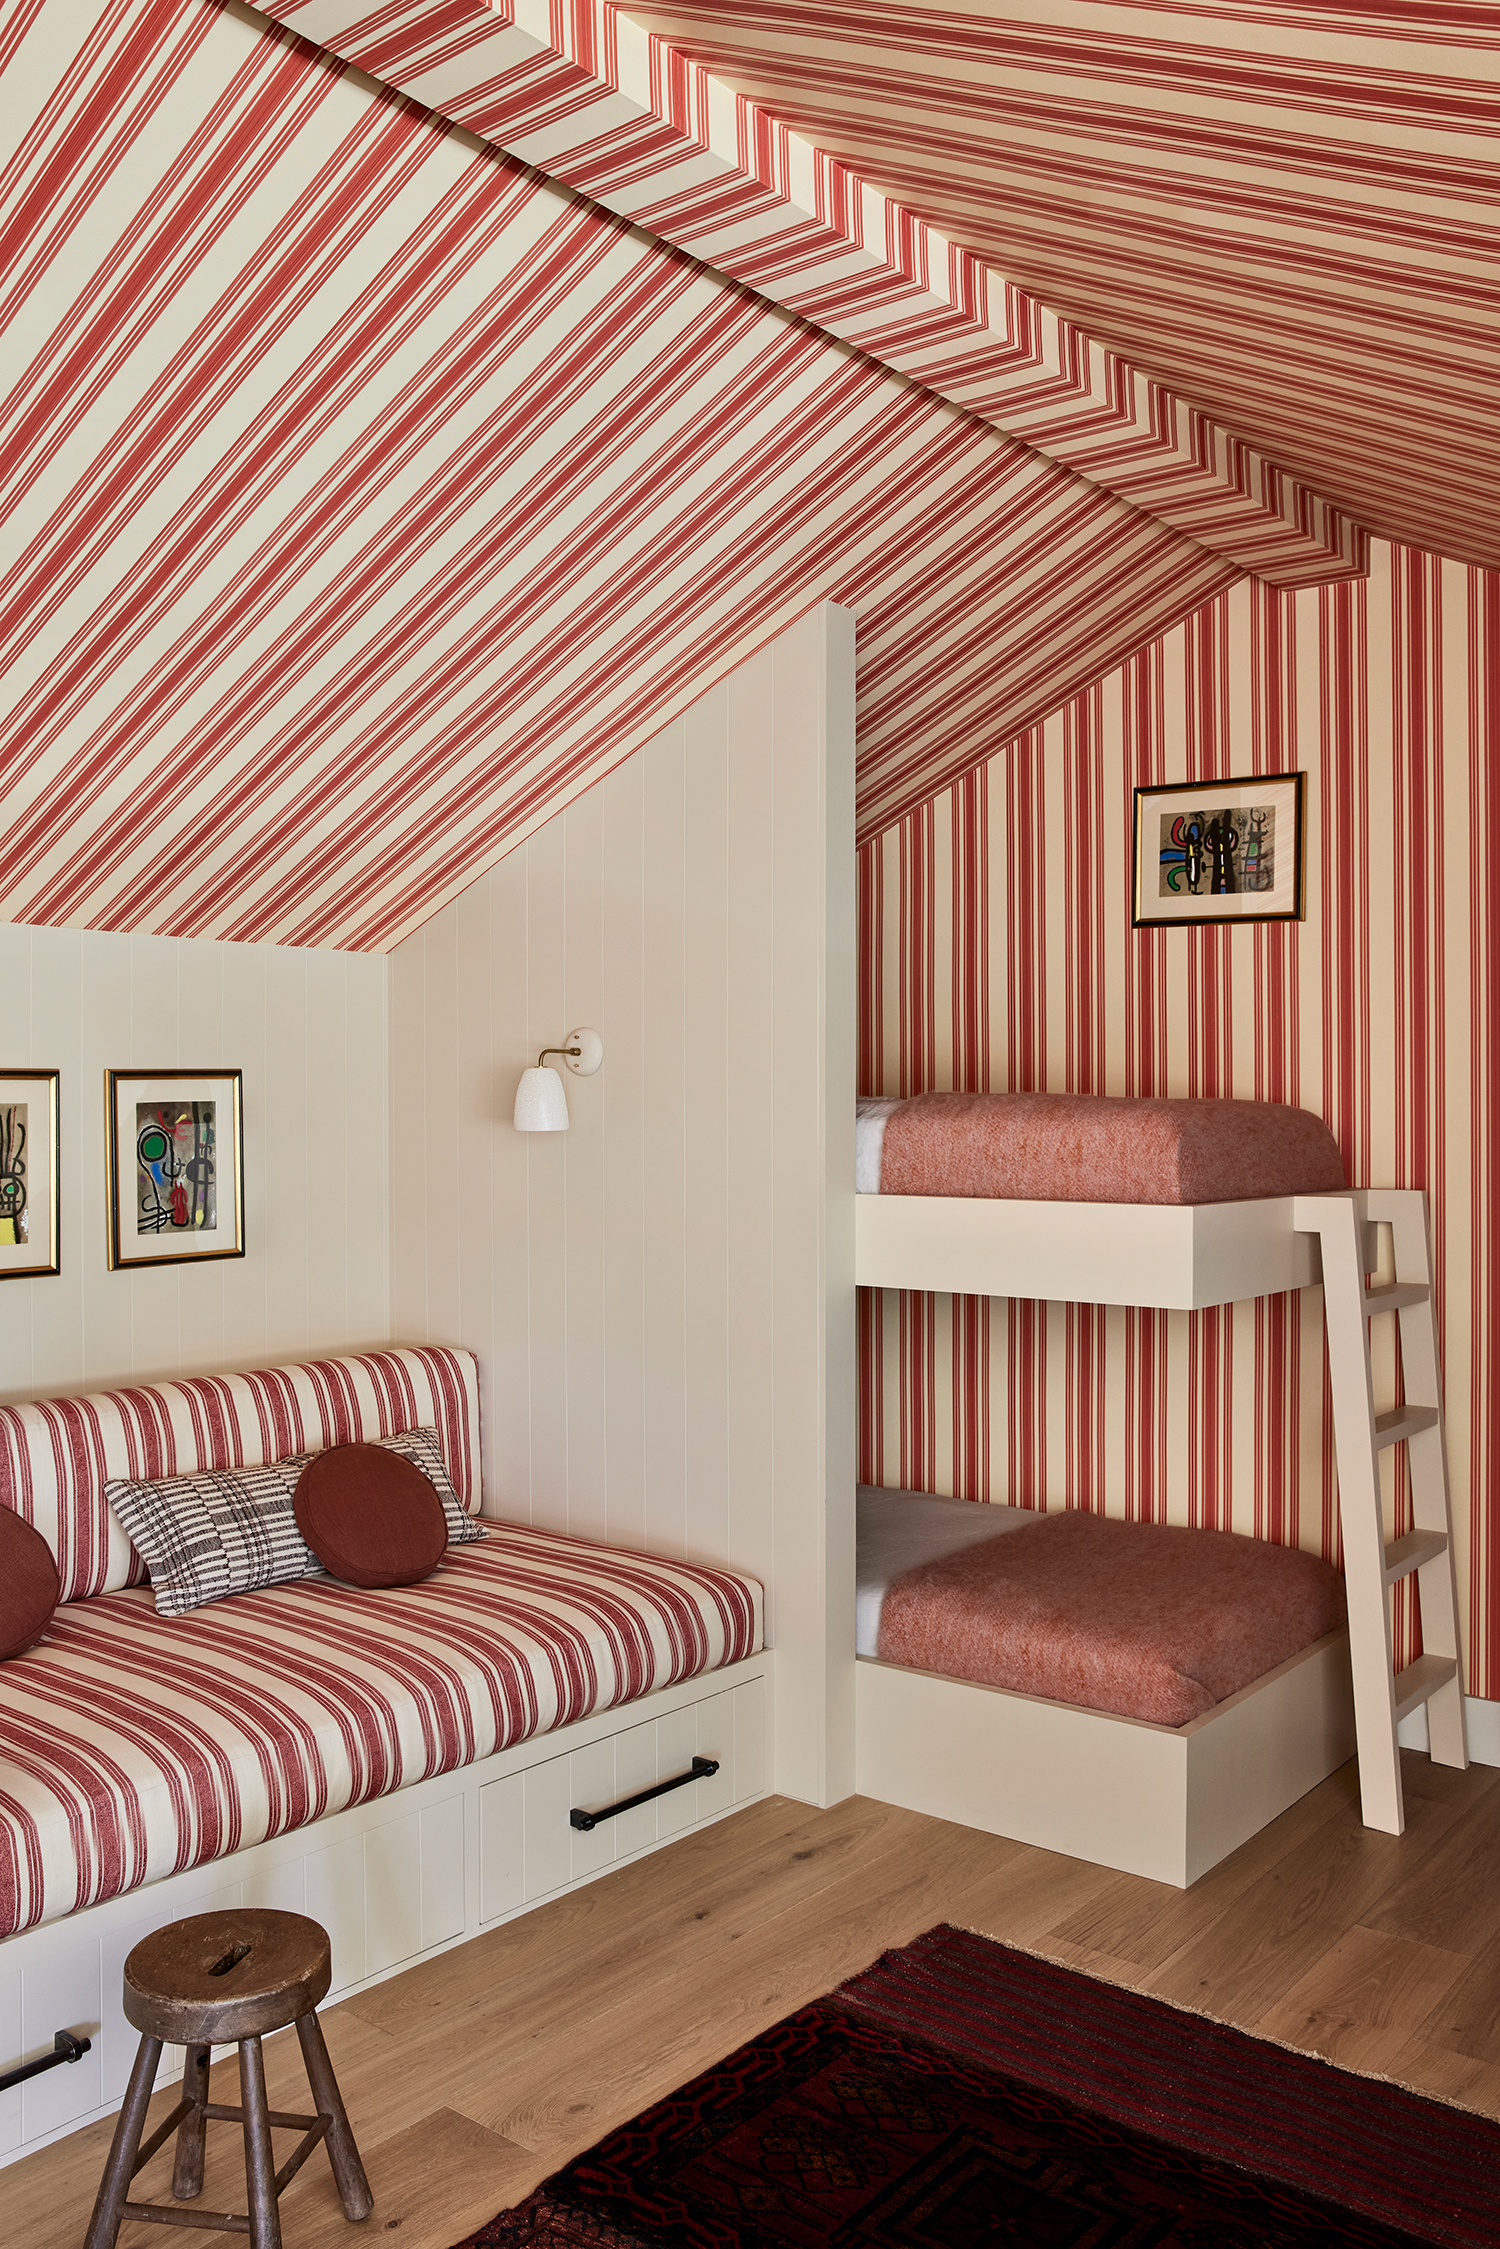 Striped Bunk Room by Studio Life Style